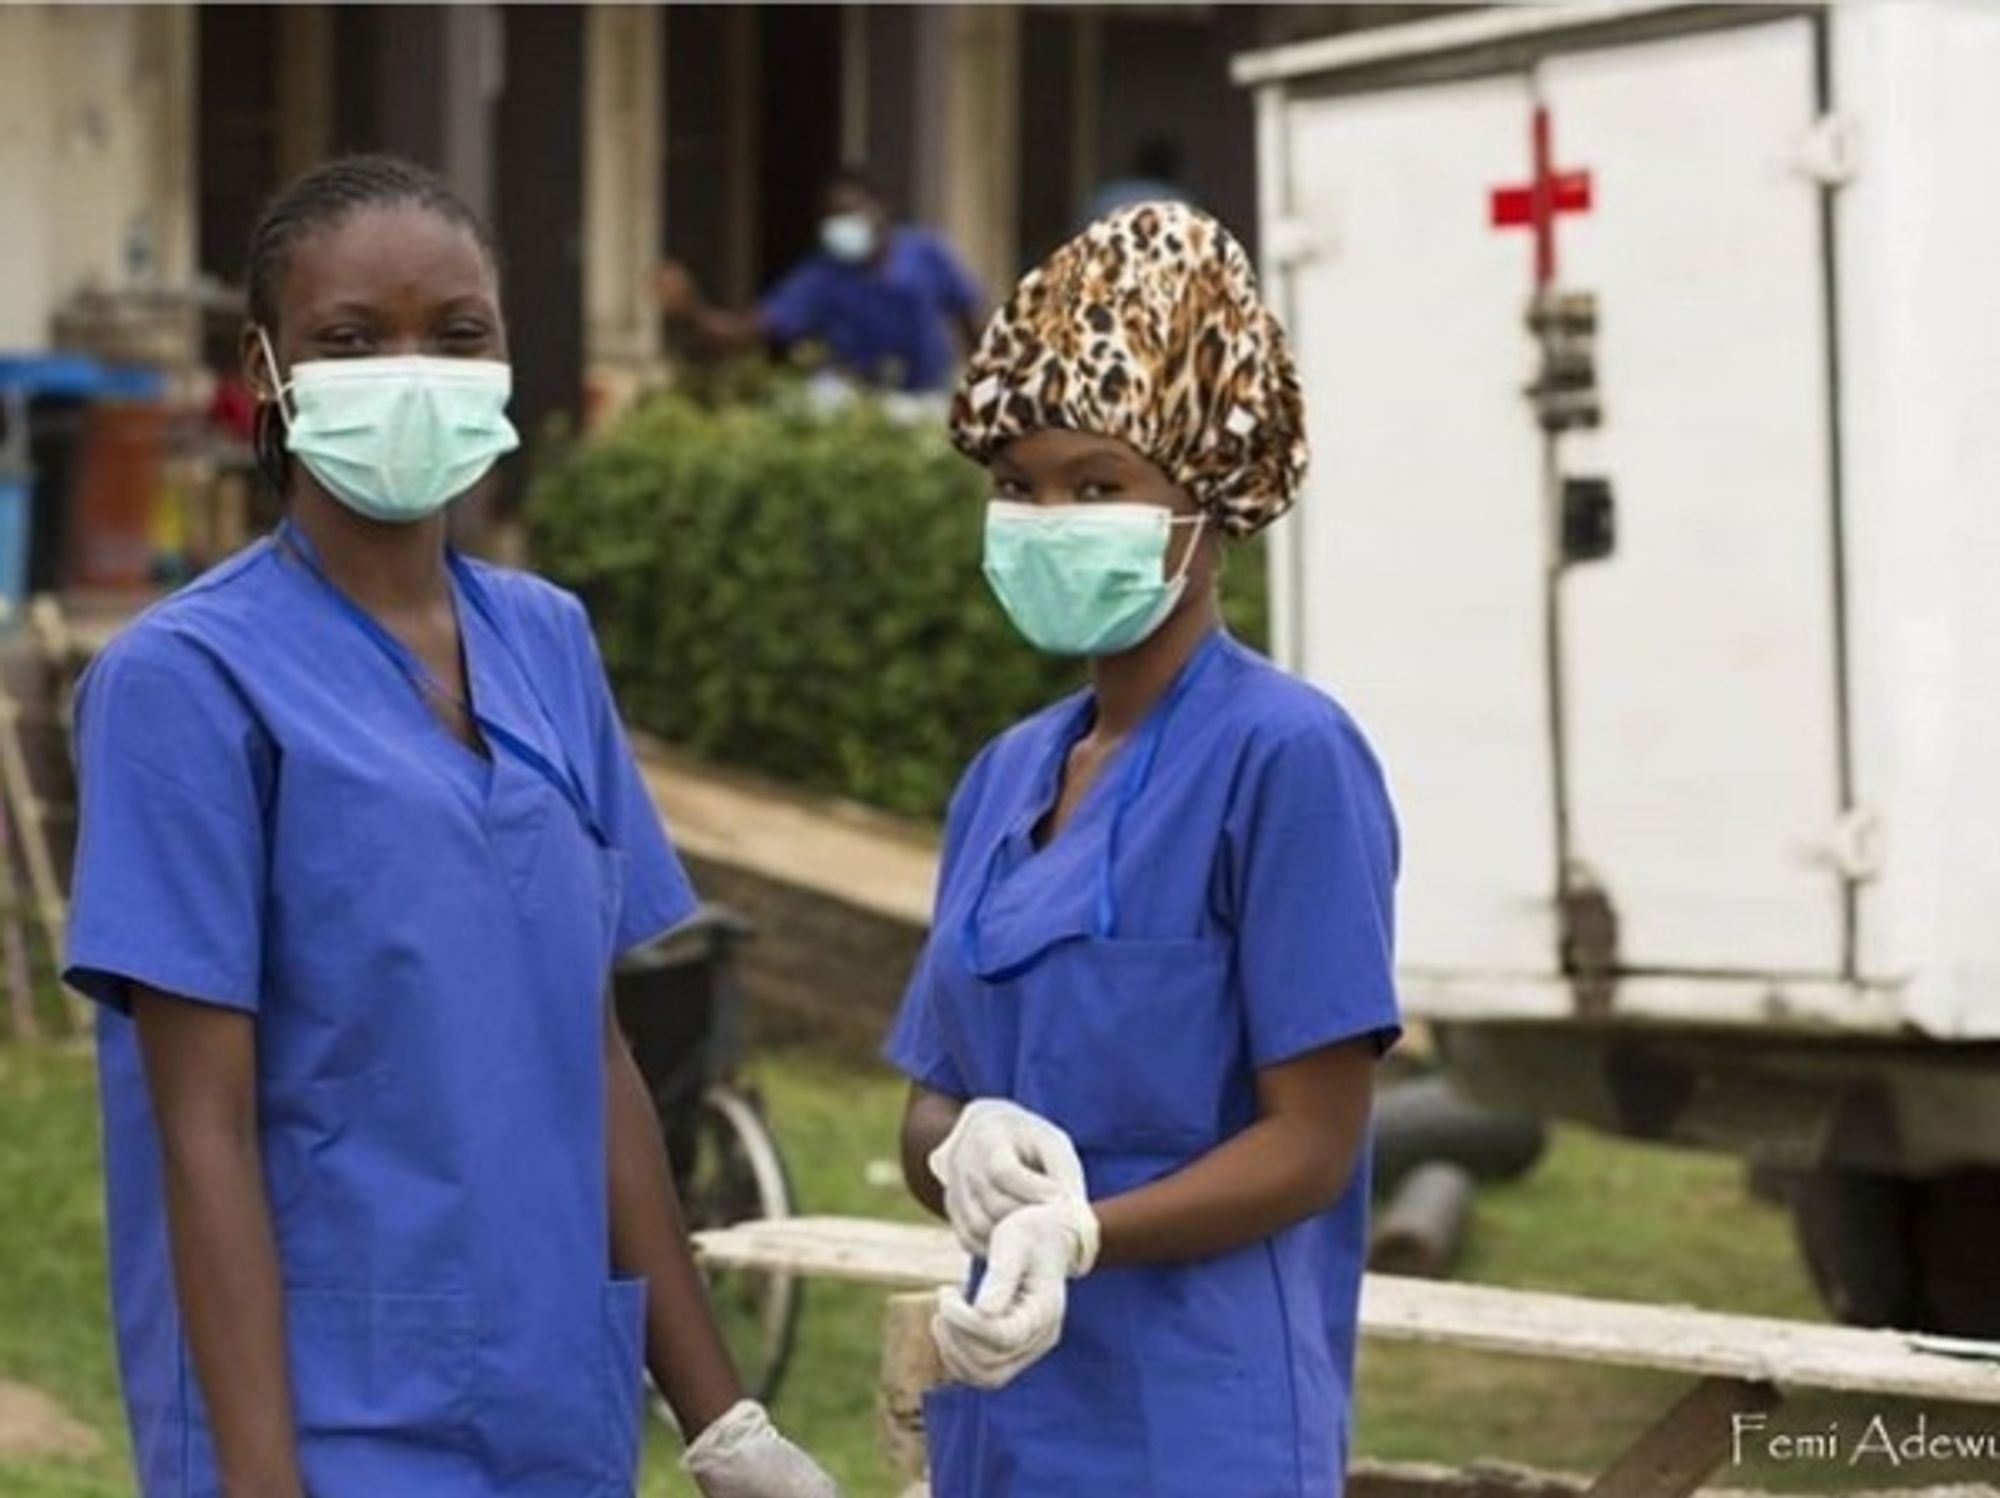 Photos: A ‘Behind-the-Scenes’ Look at the Experiences of Nigeria's Frontline Pandemic Workers